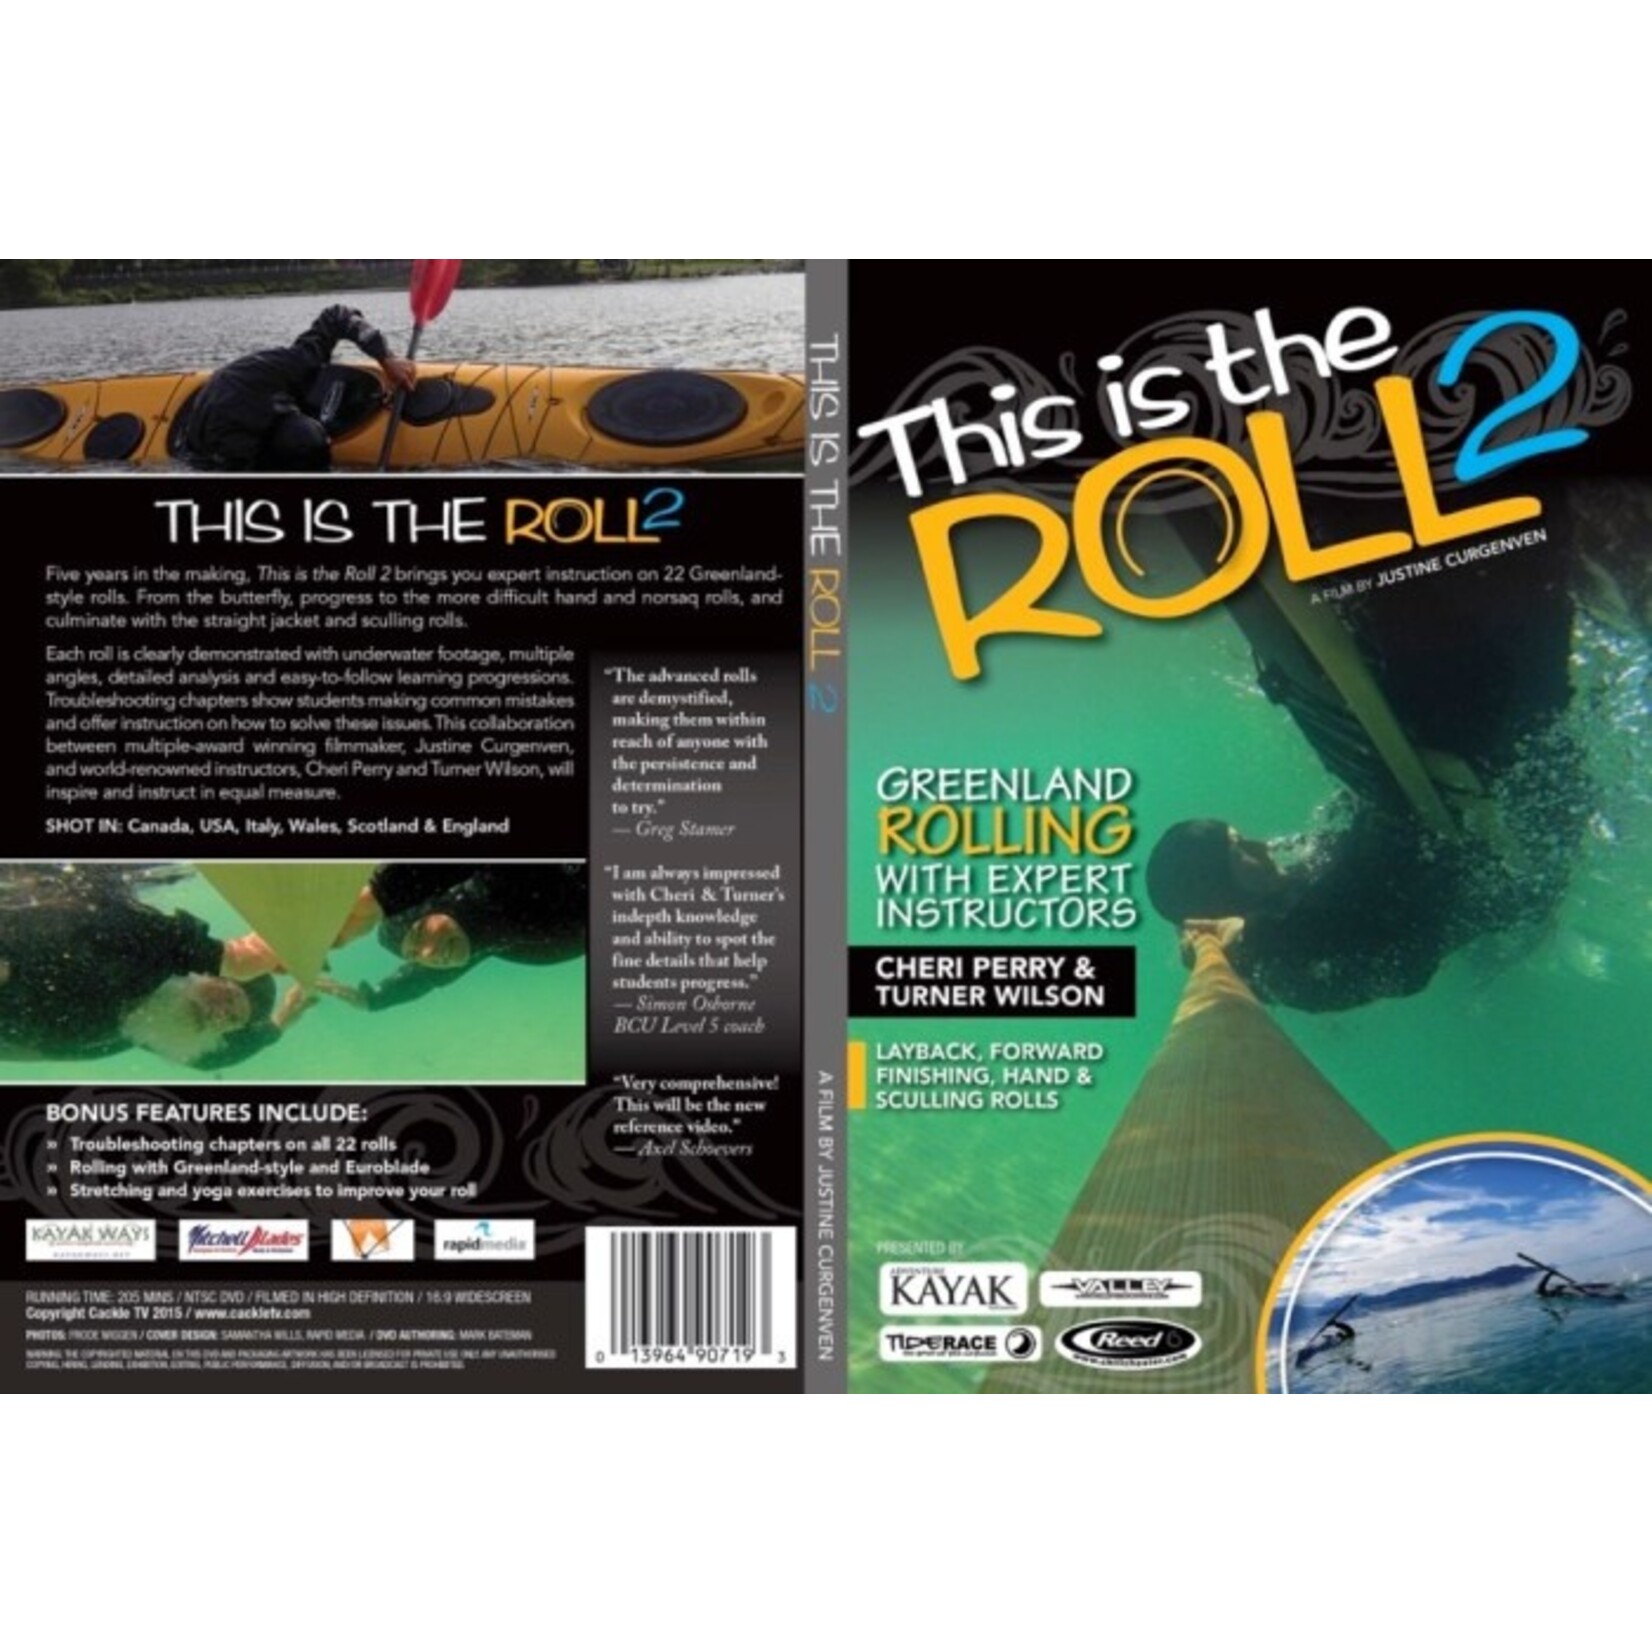 Cackle - This is the Roll 2 - DVD